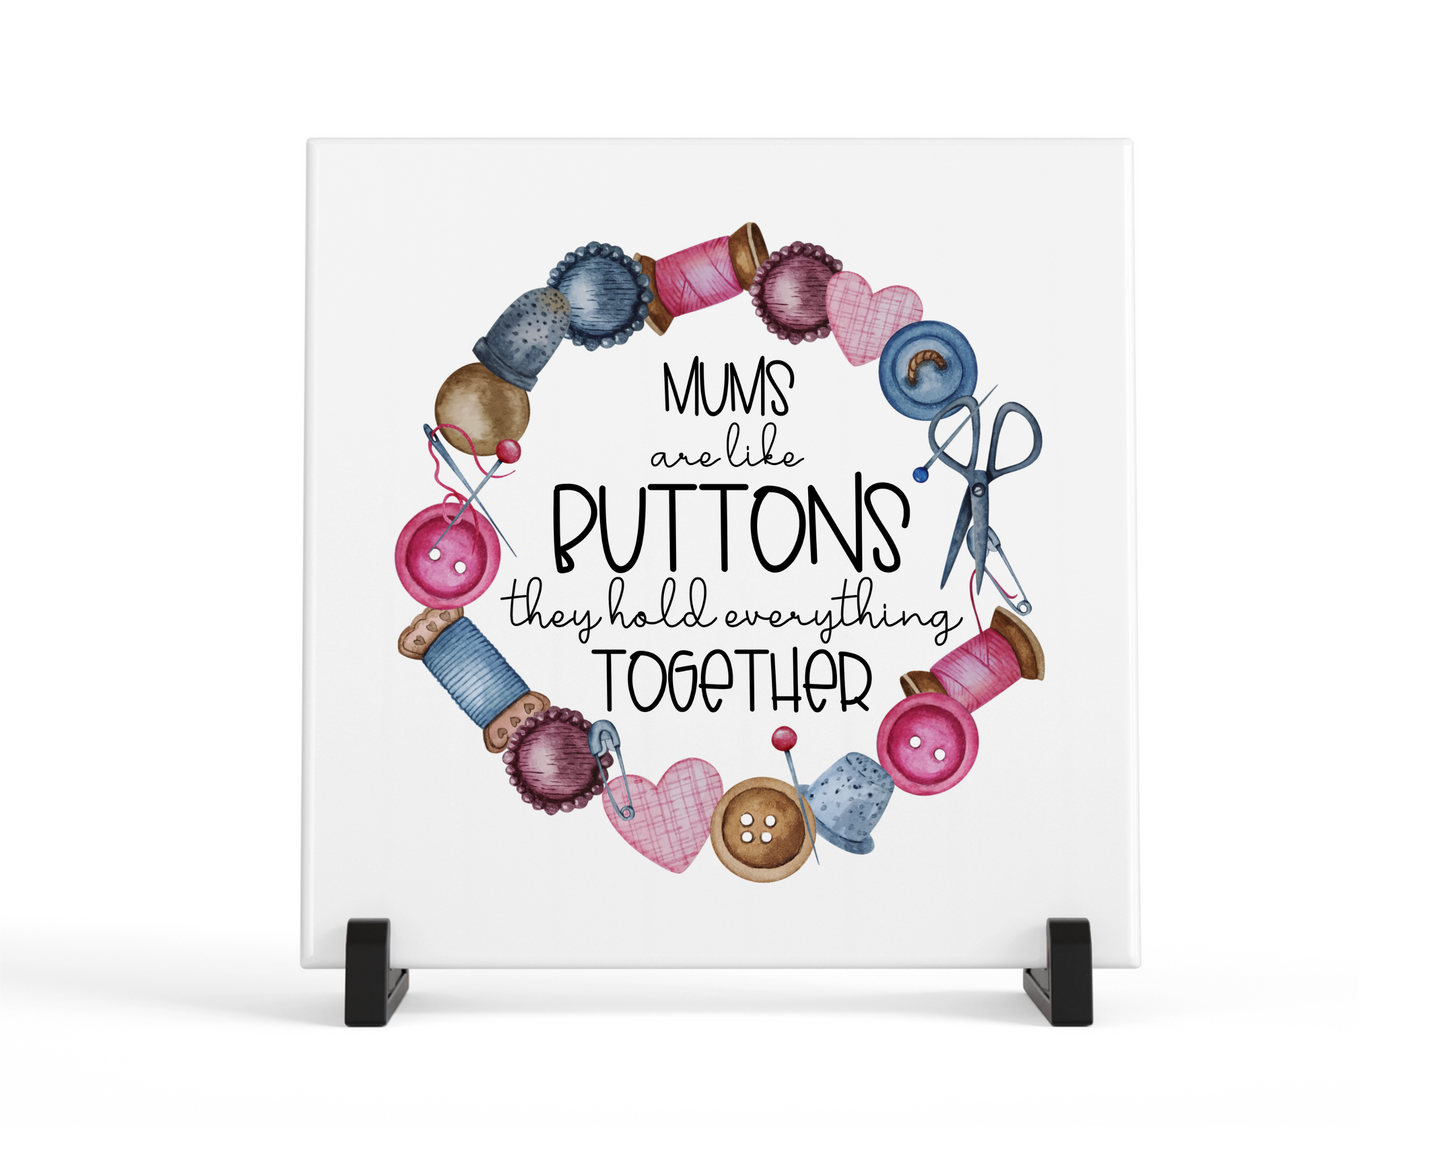 Mums are like buttons tile